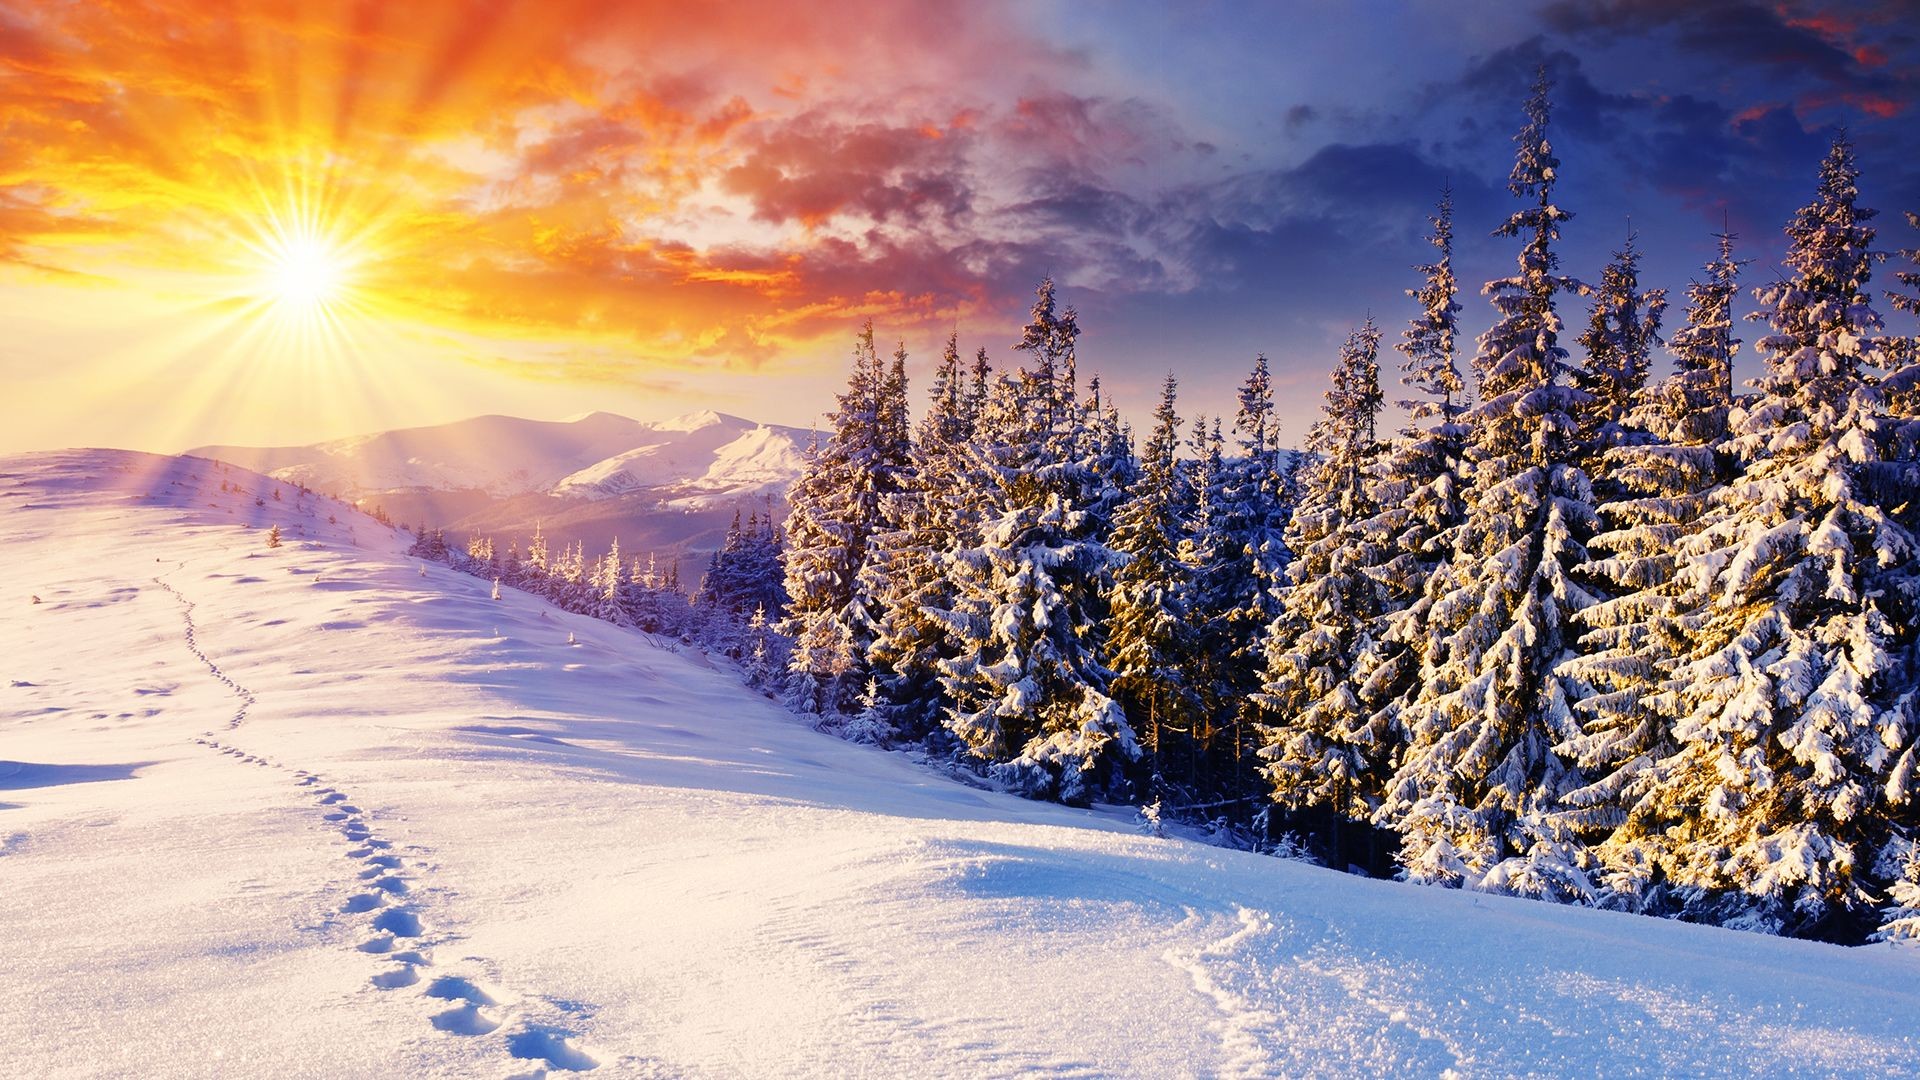 1920x1080 winter wallpaper iphone with high quality wallpaper resolution on nature  category similar with  animal christmas